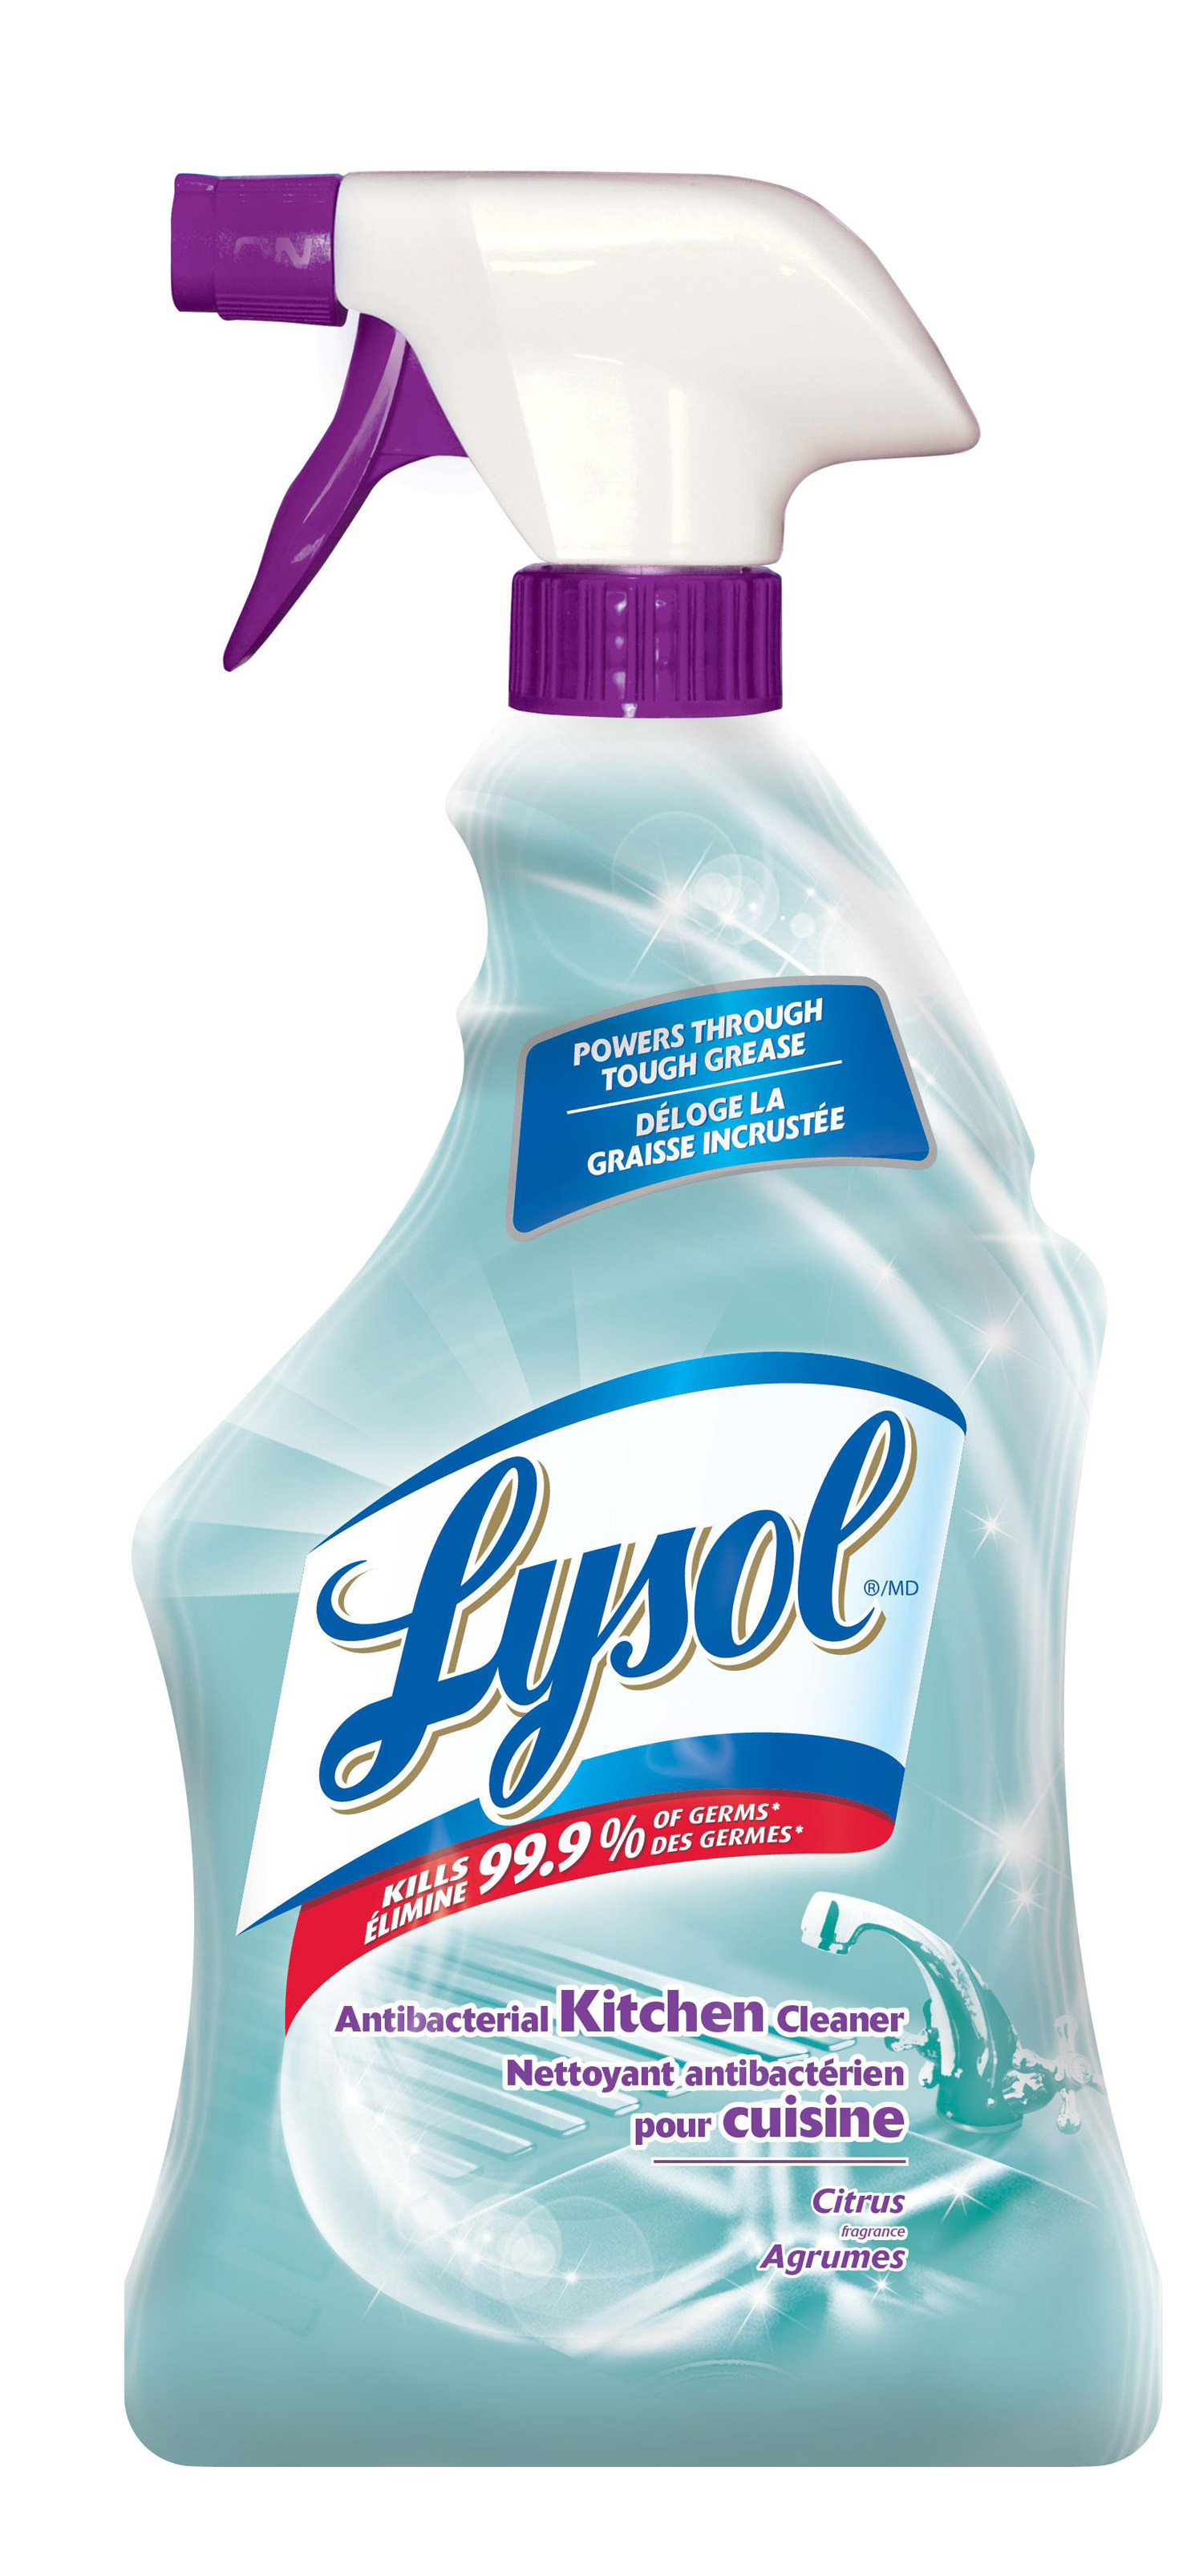 LYSOL® Antibacterial Kitchen Cleaner - Citrus (Canada) (Discontinued)